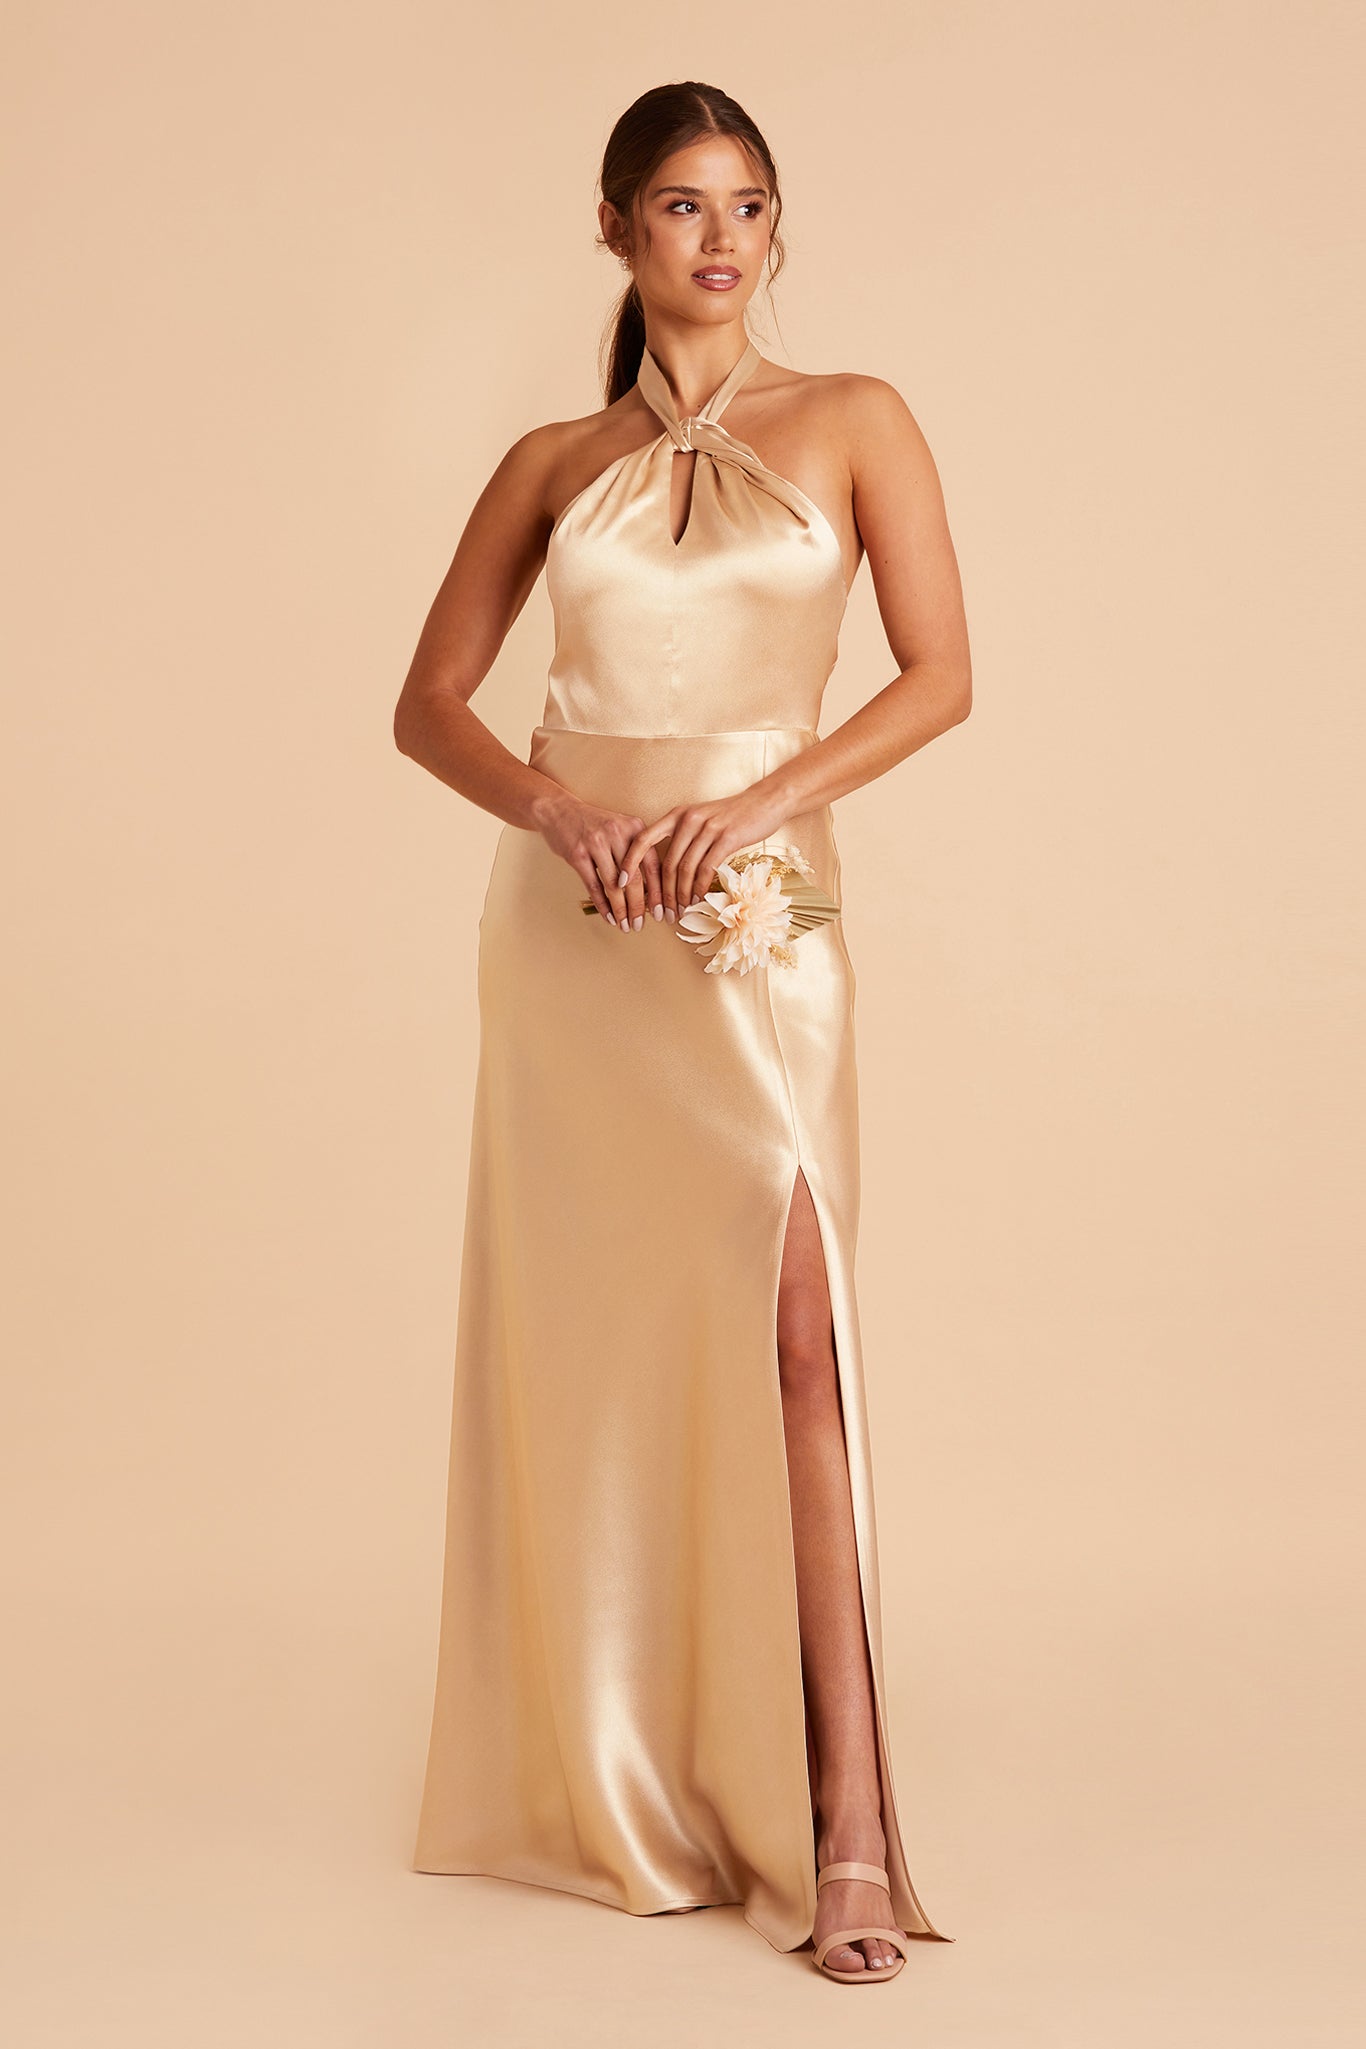 Monica Satin Dress in gold satin by Birdy Grey, front view